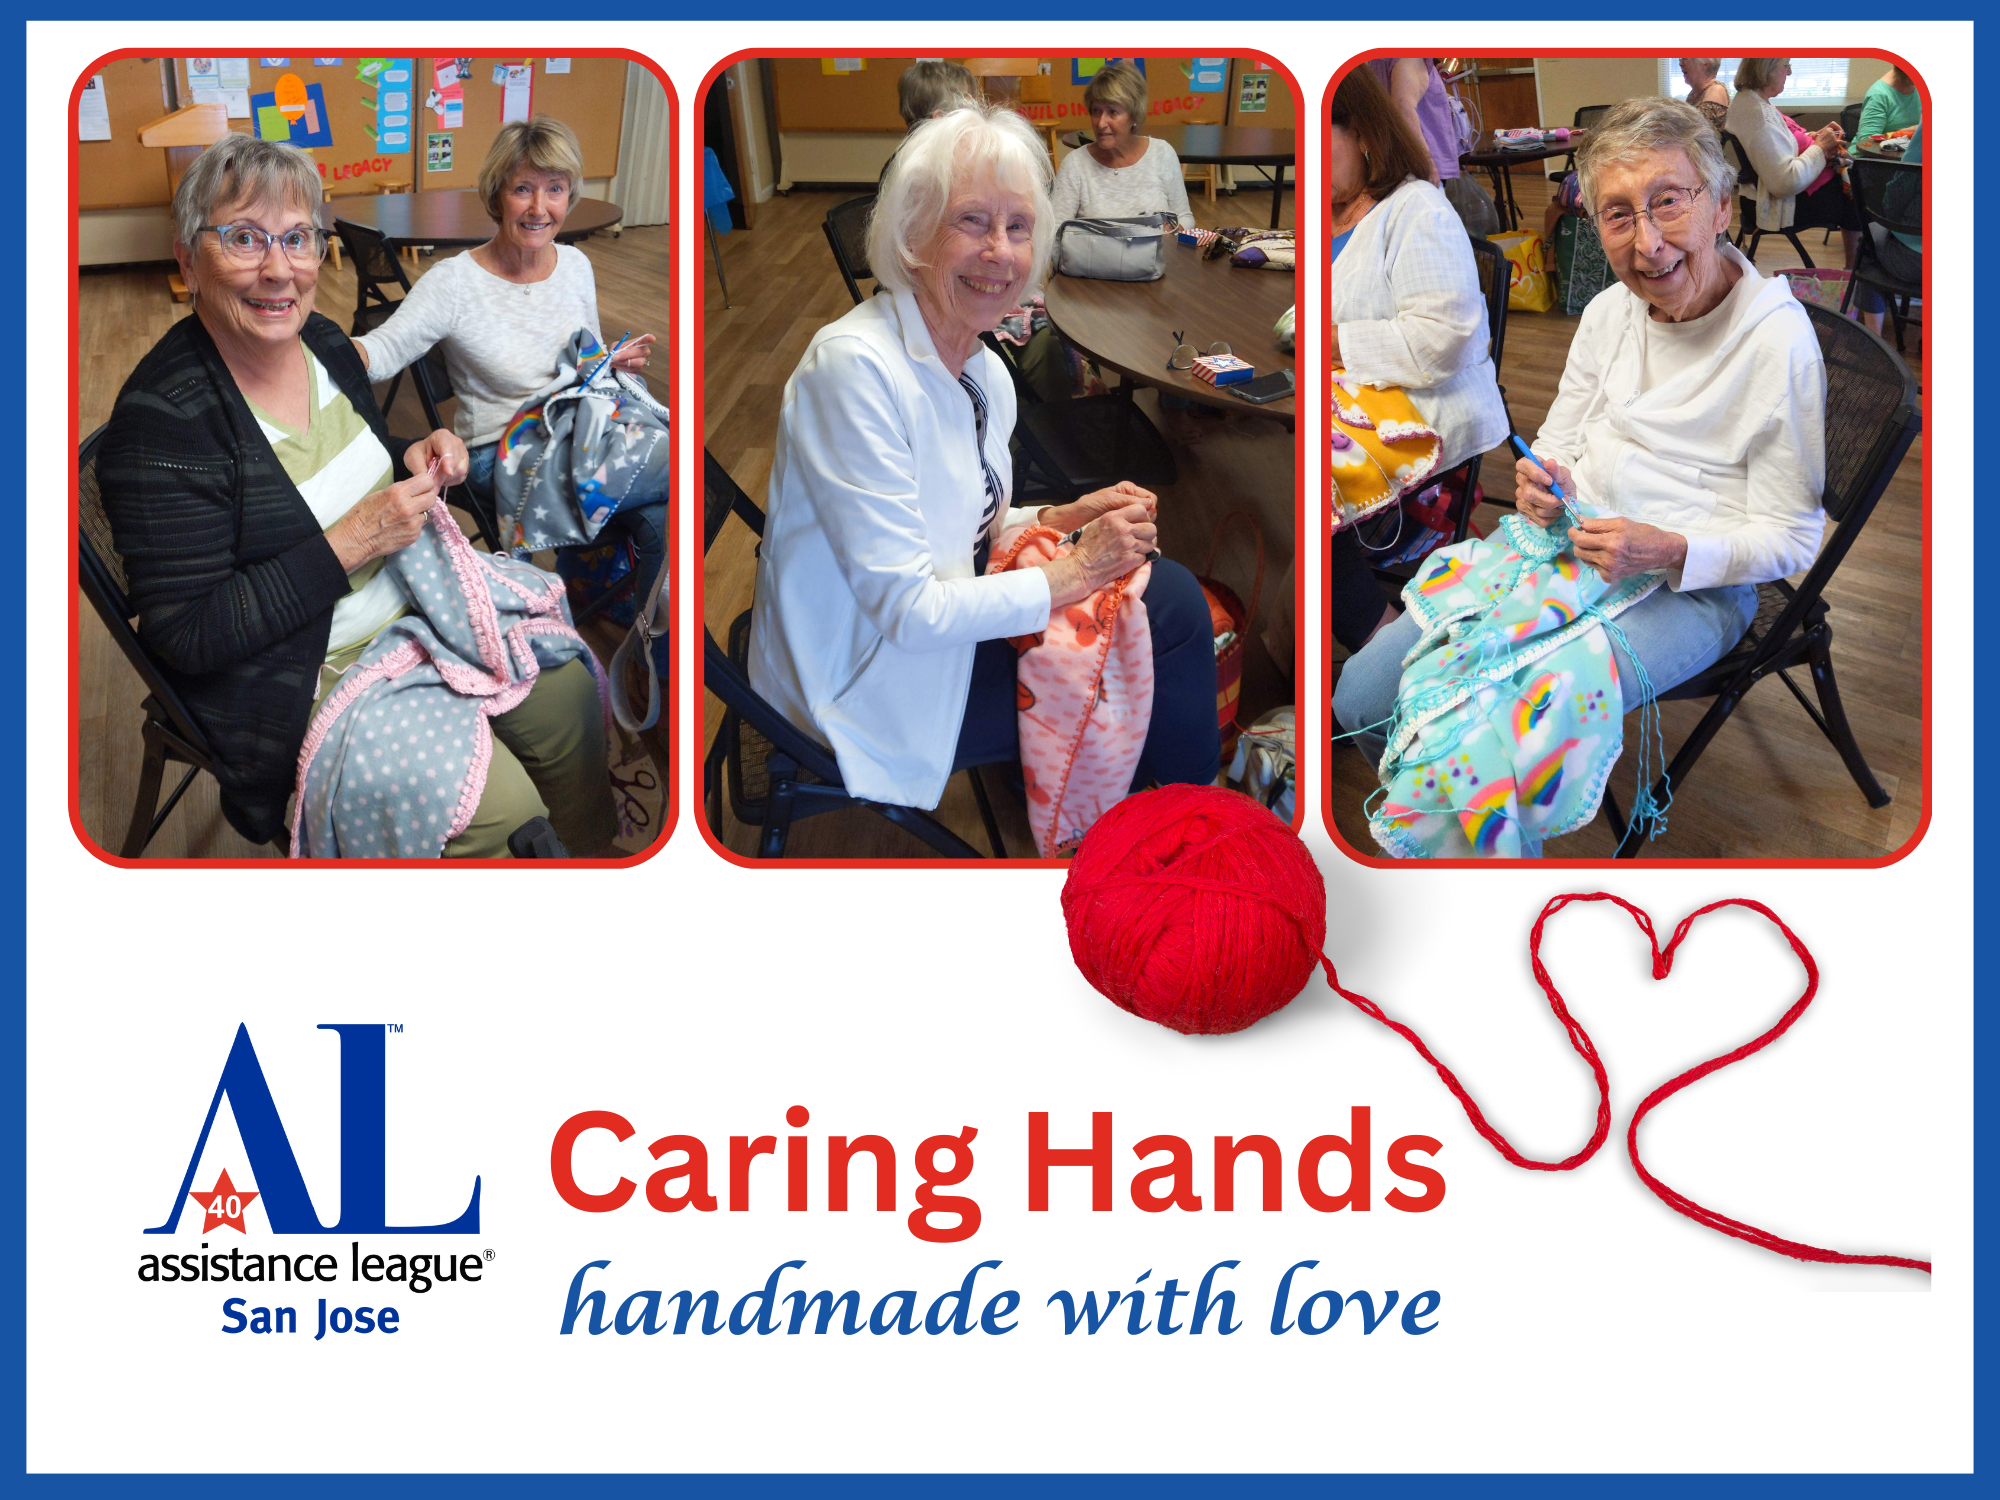 Caring Hands - handmade with love